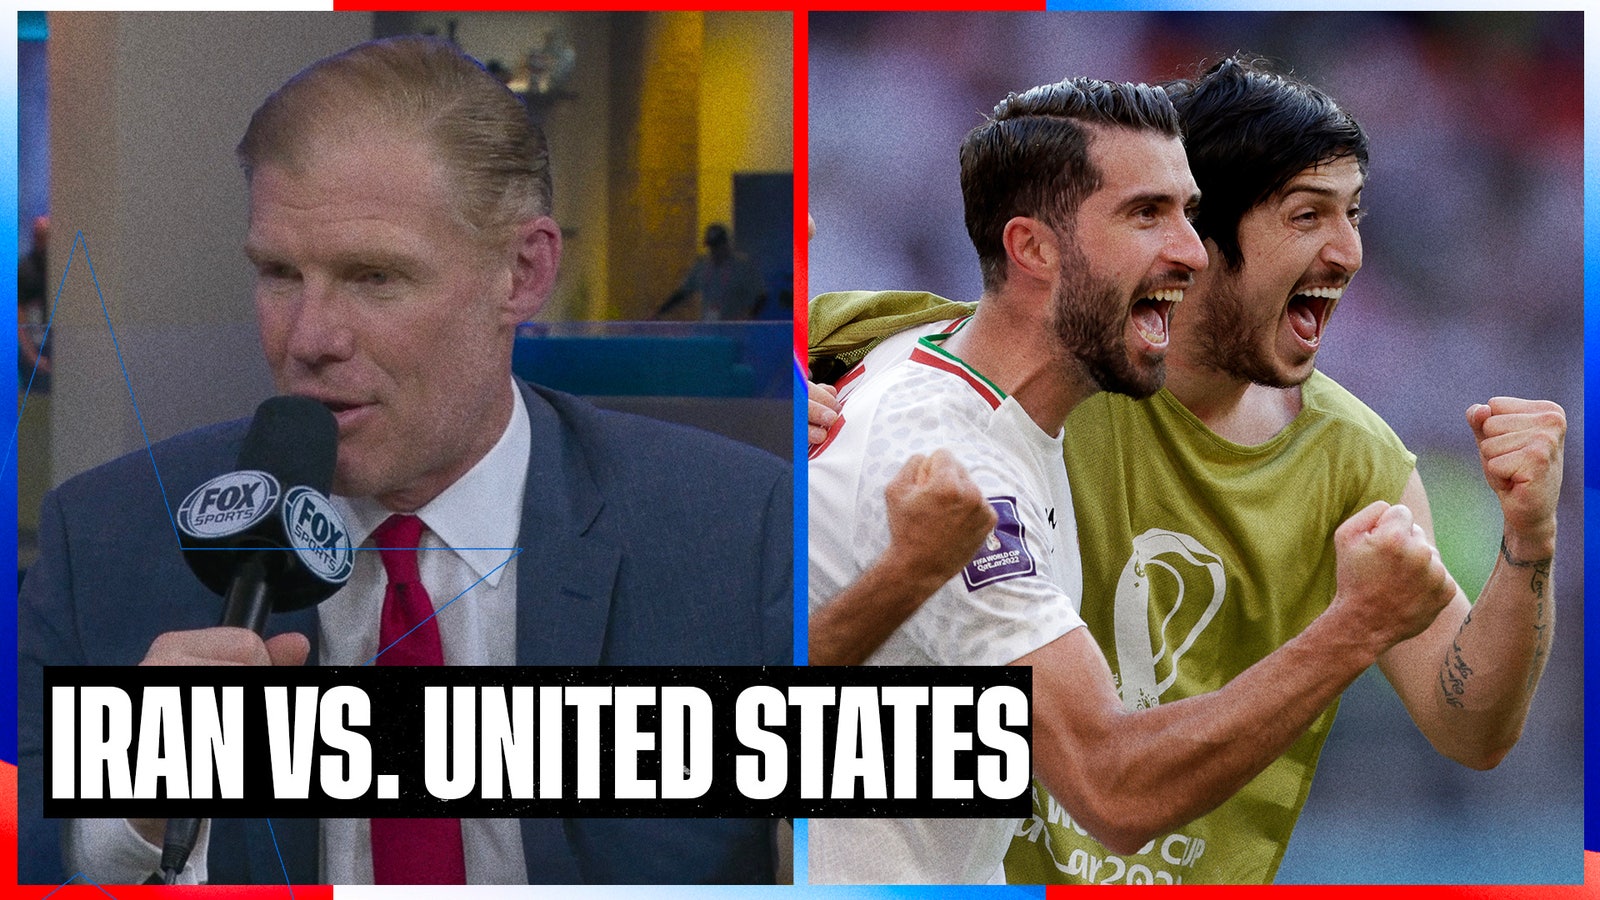 Greg Berhalter, should the USMNT worry about the war against Iran?